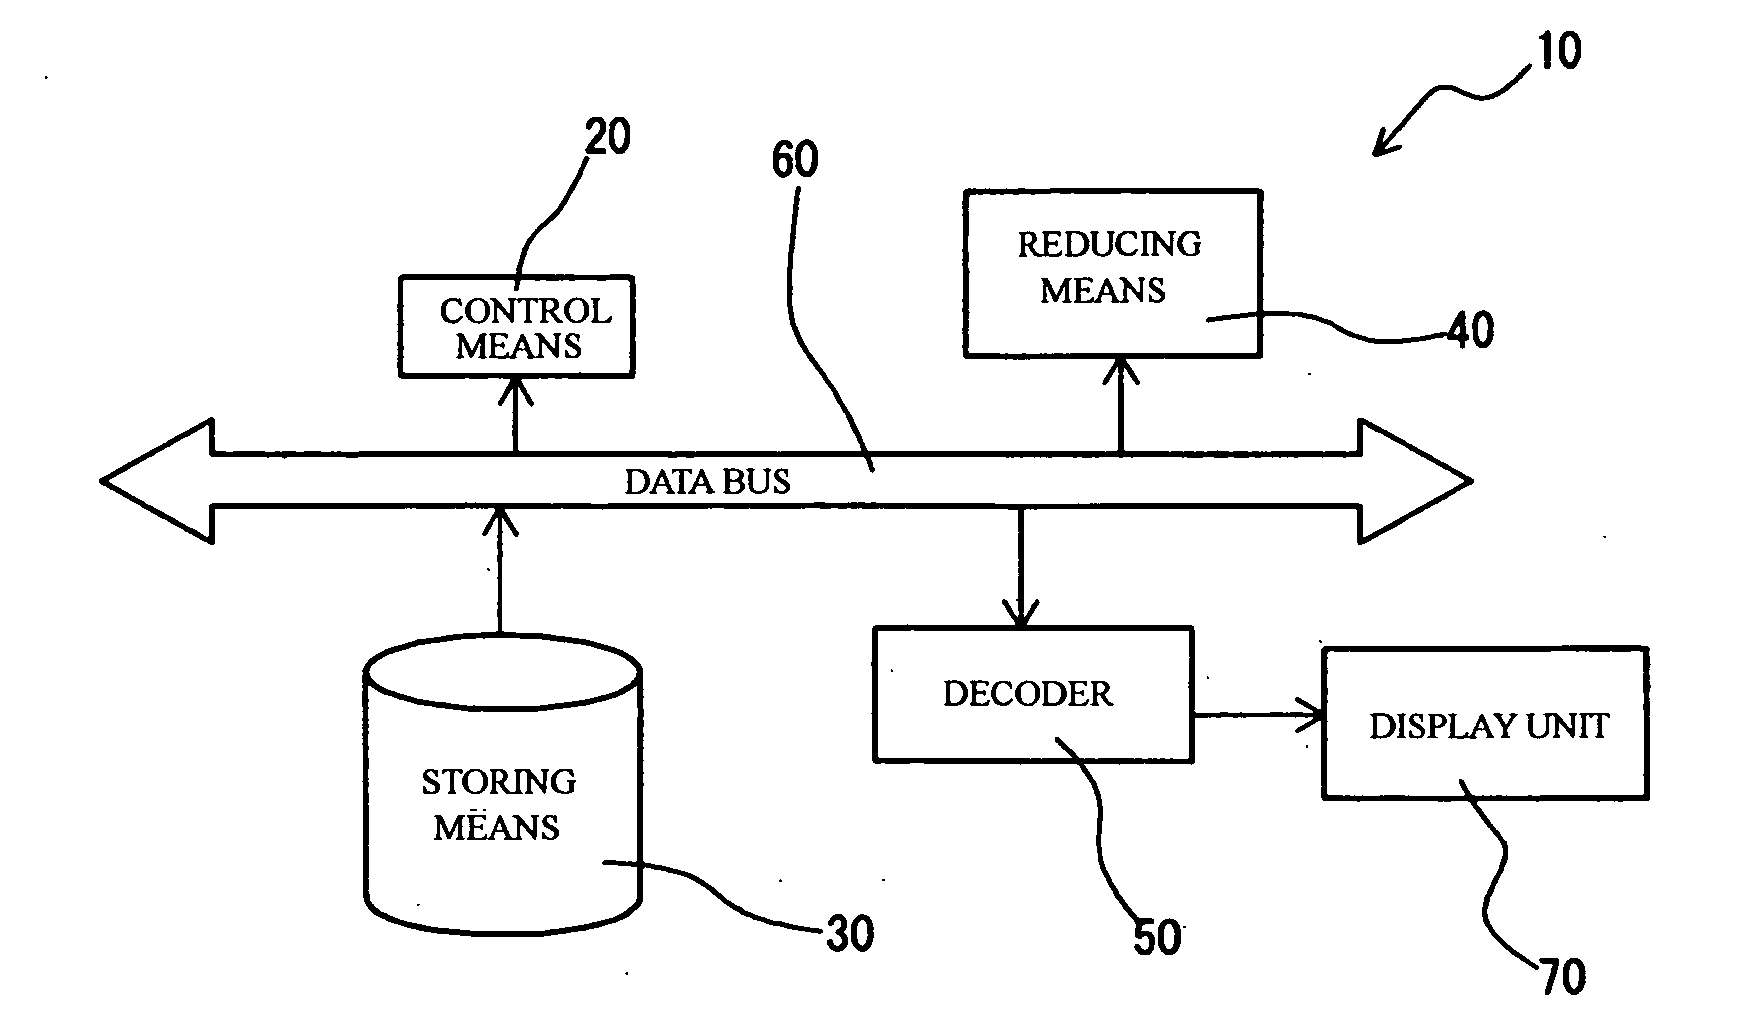 Method of reproducing contents data and apparatus for reproducing the same